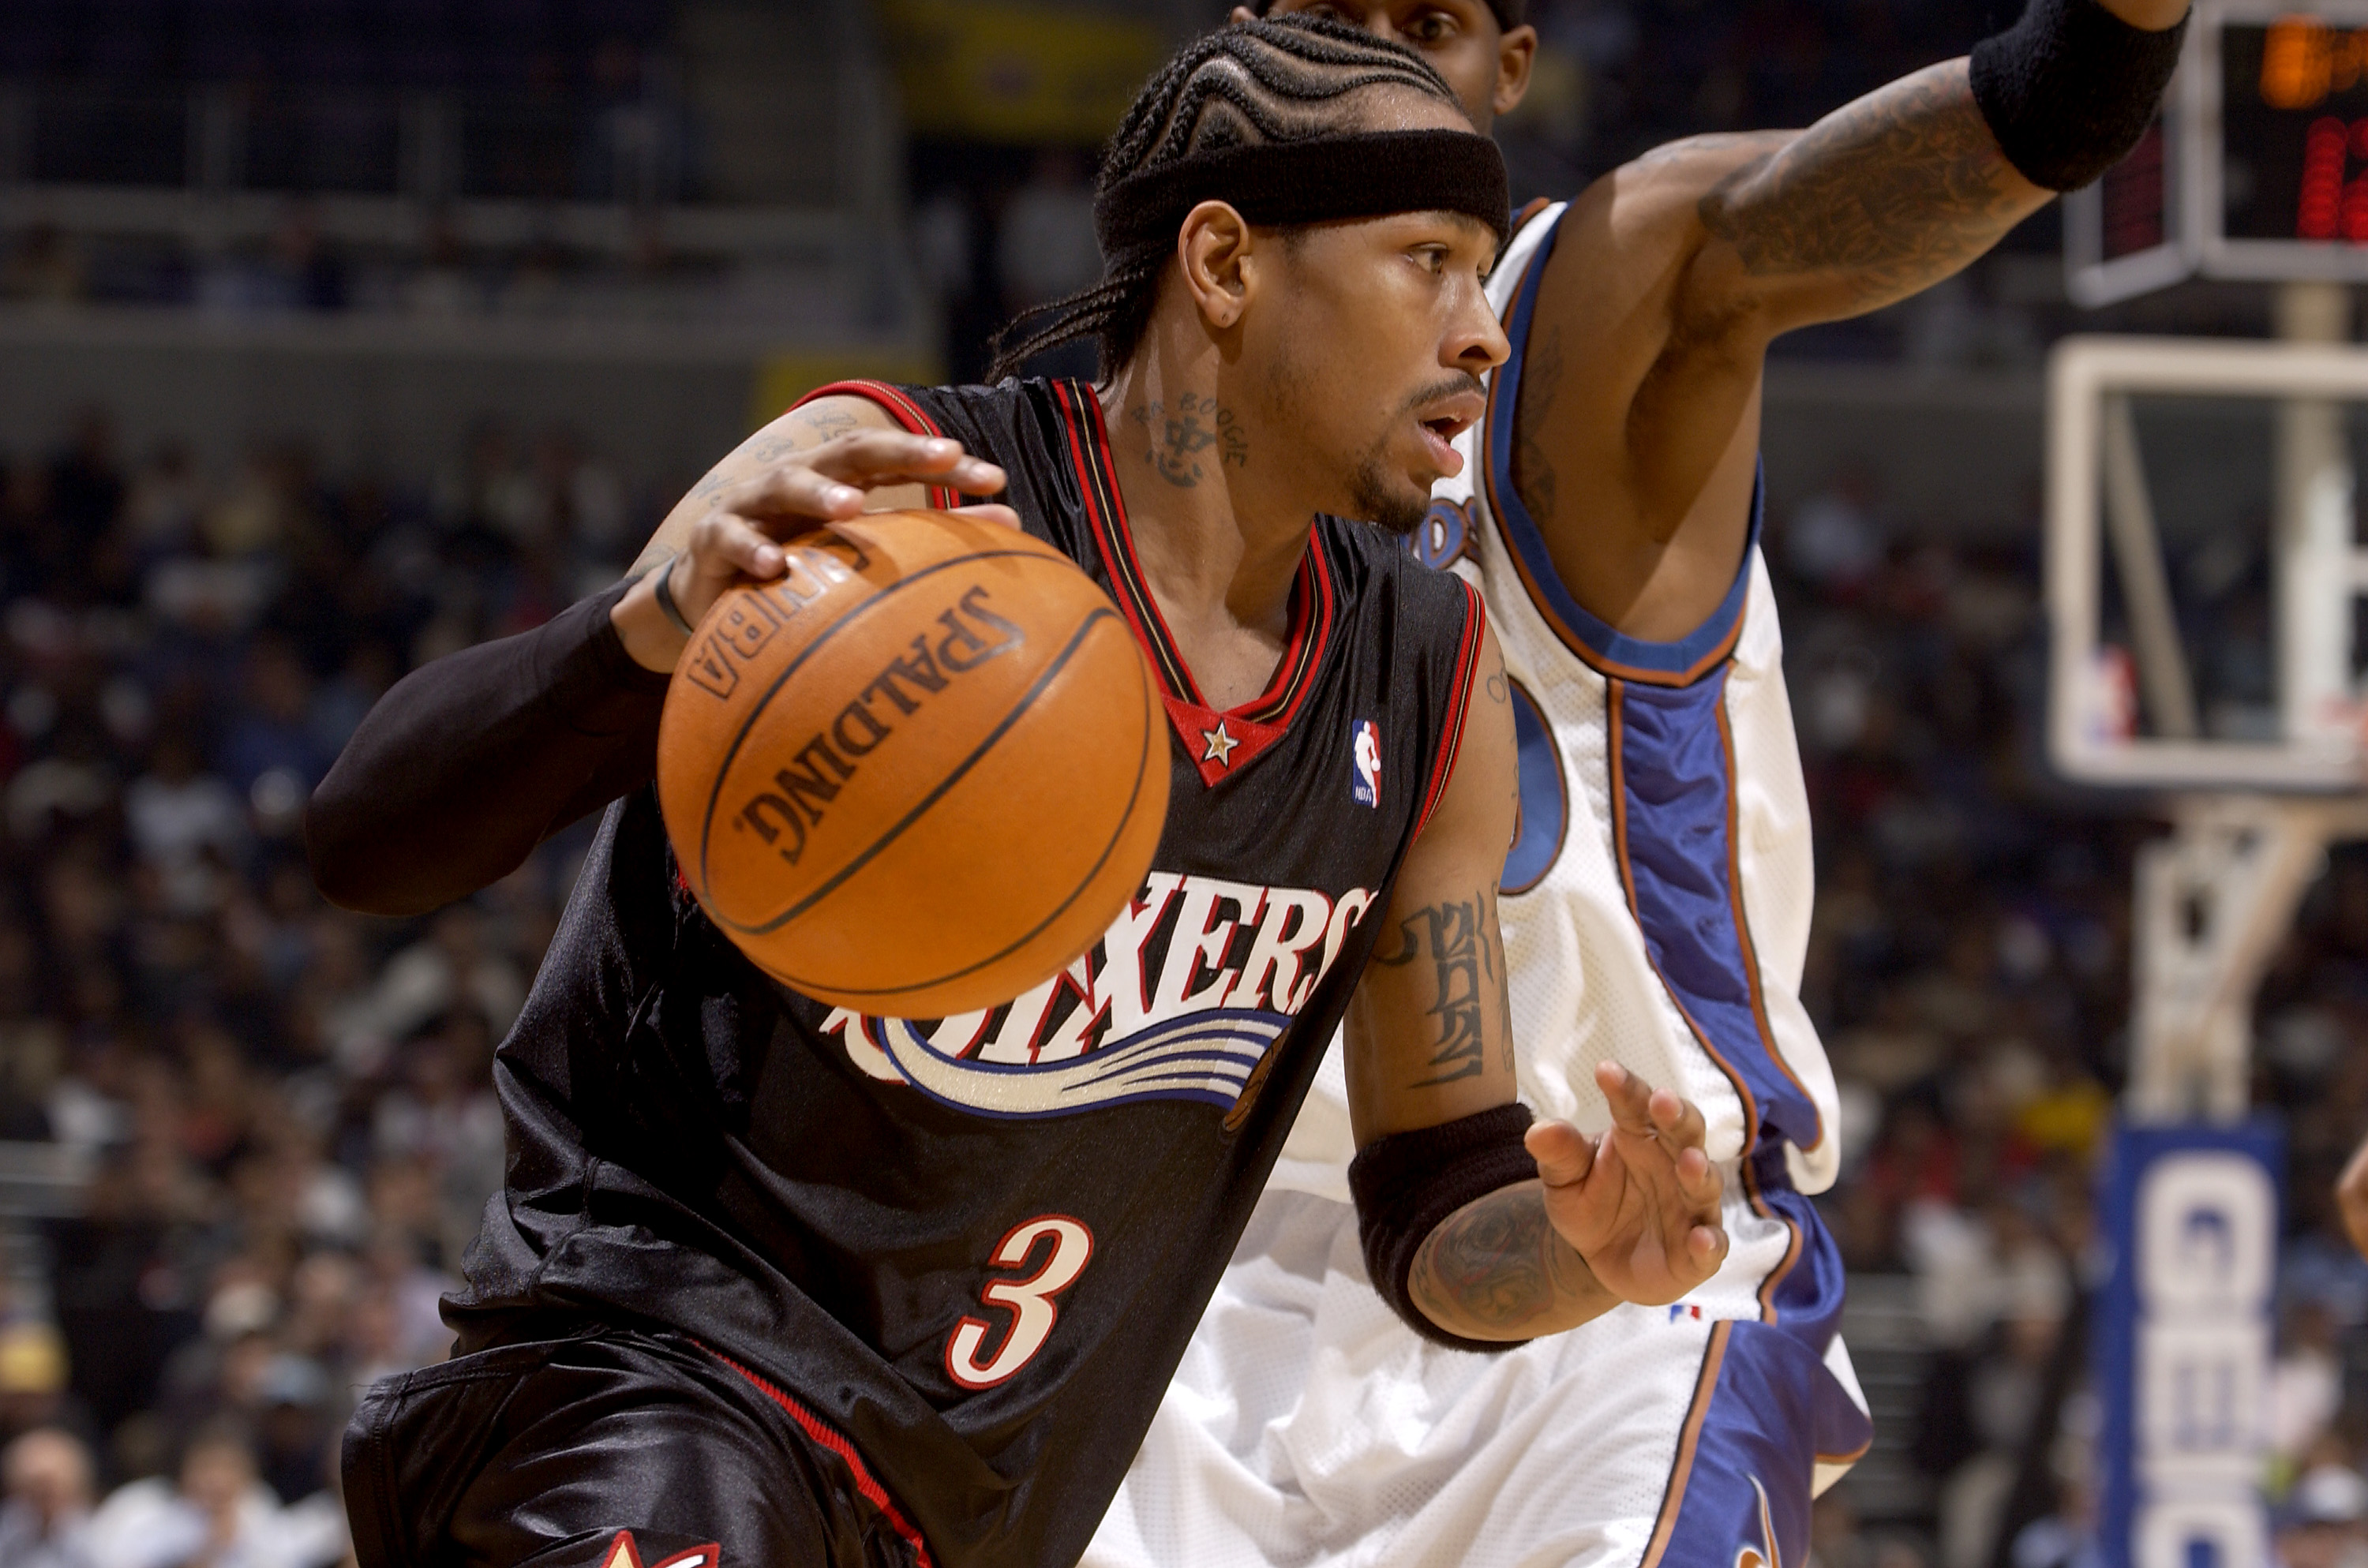 Allen Iverson of the Philadelphia 76ers handles the ball against the Washington Wizards.